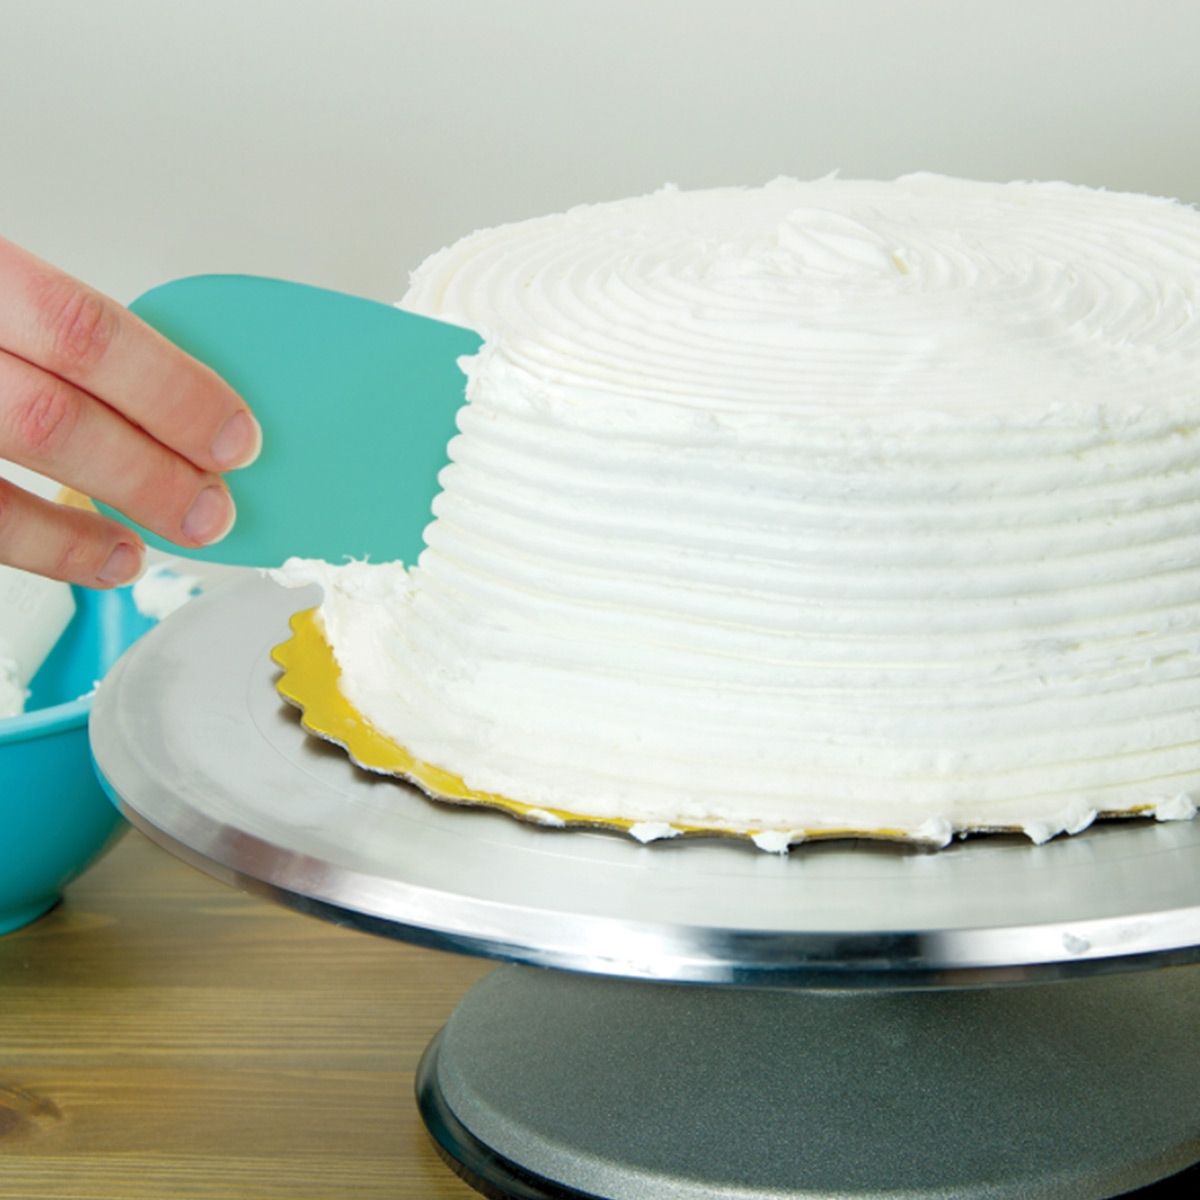 Princeton Brush Catalyst Contours are great for cake decorating